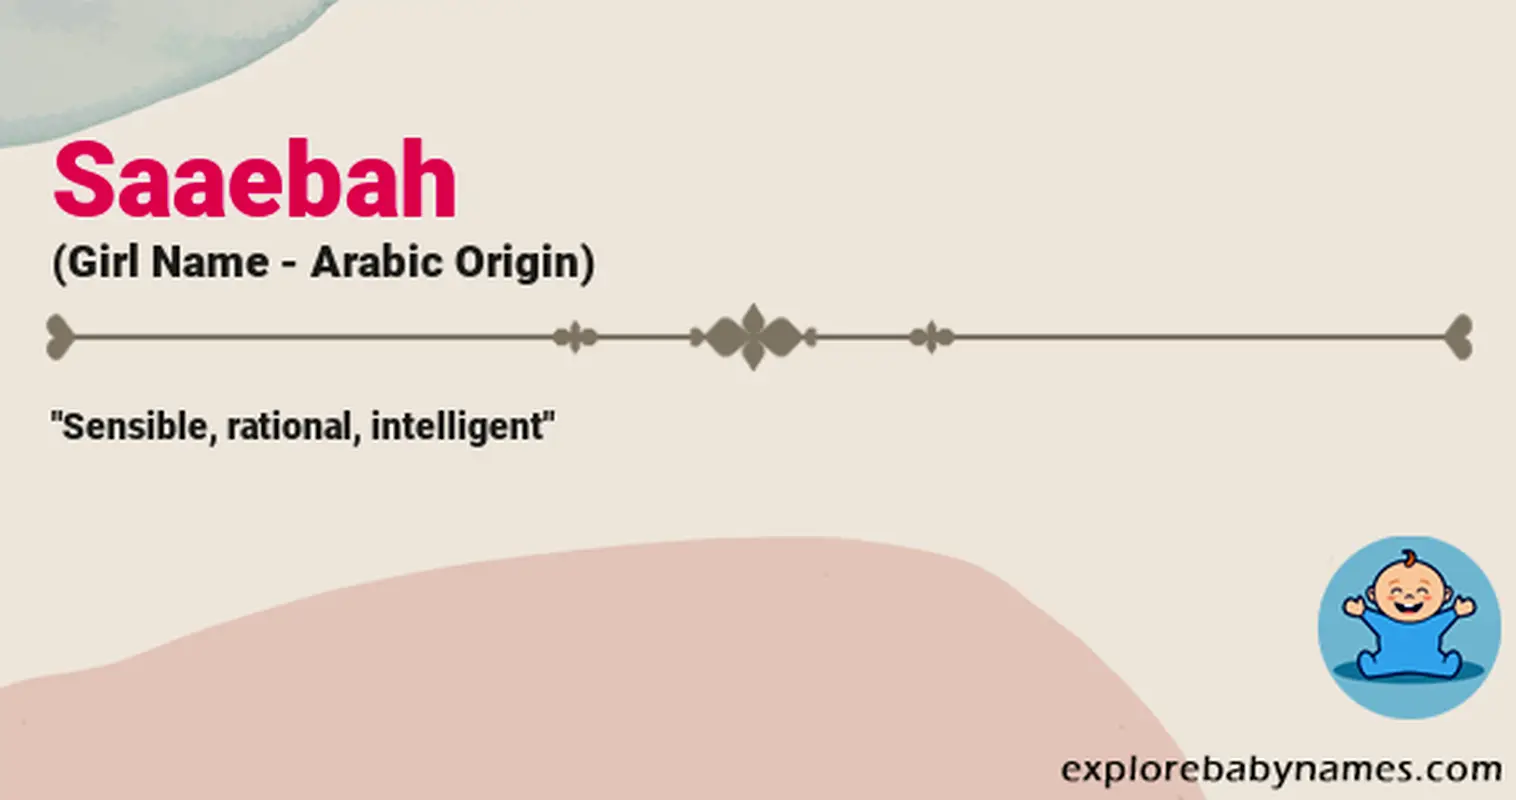 Meaning of Saaebah